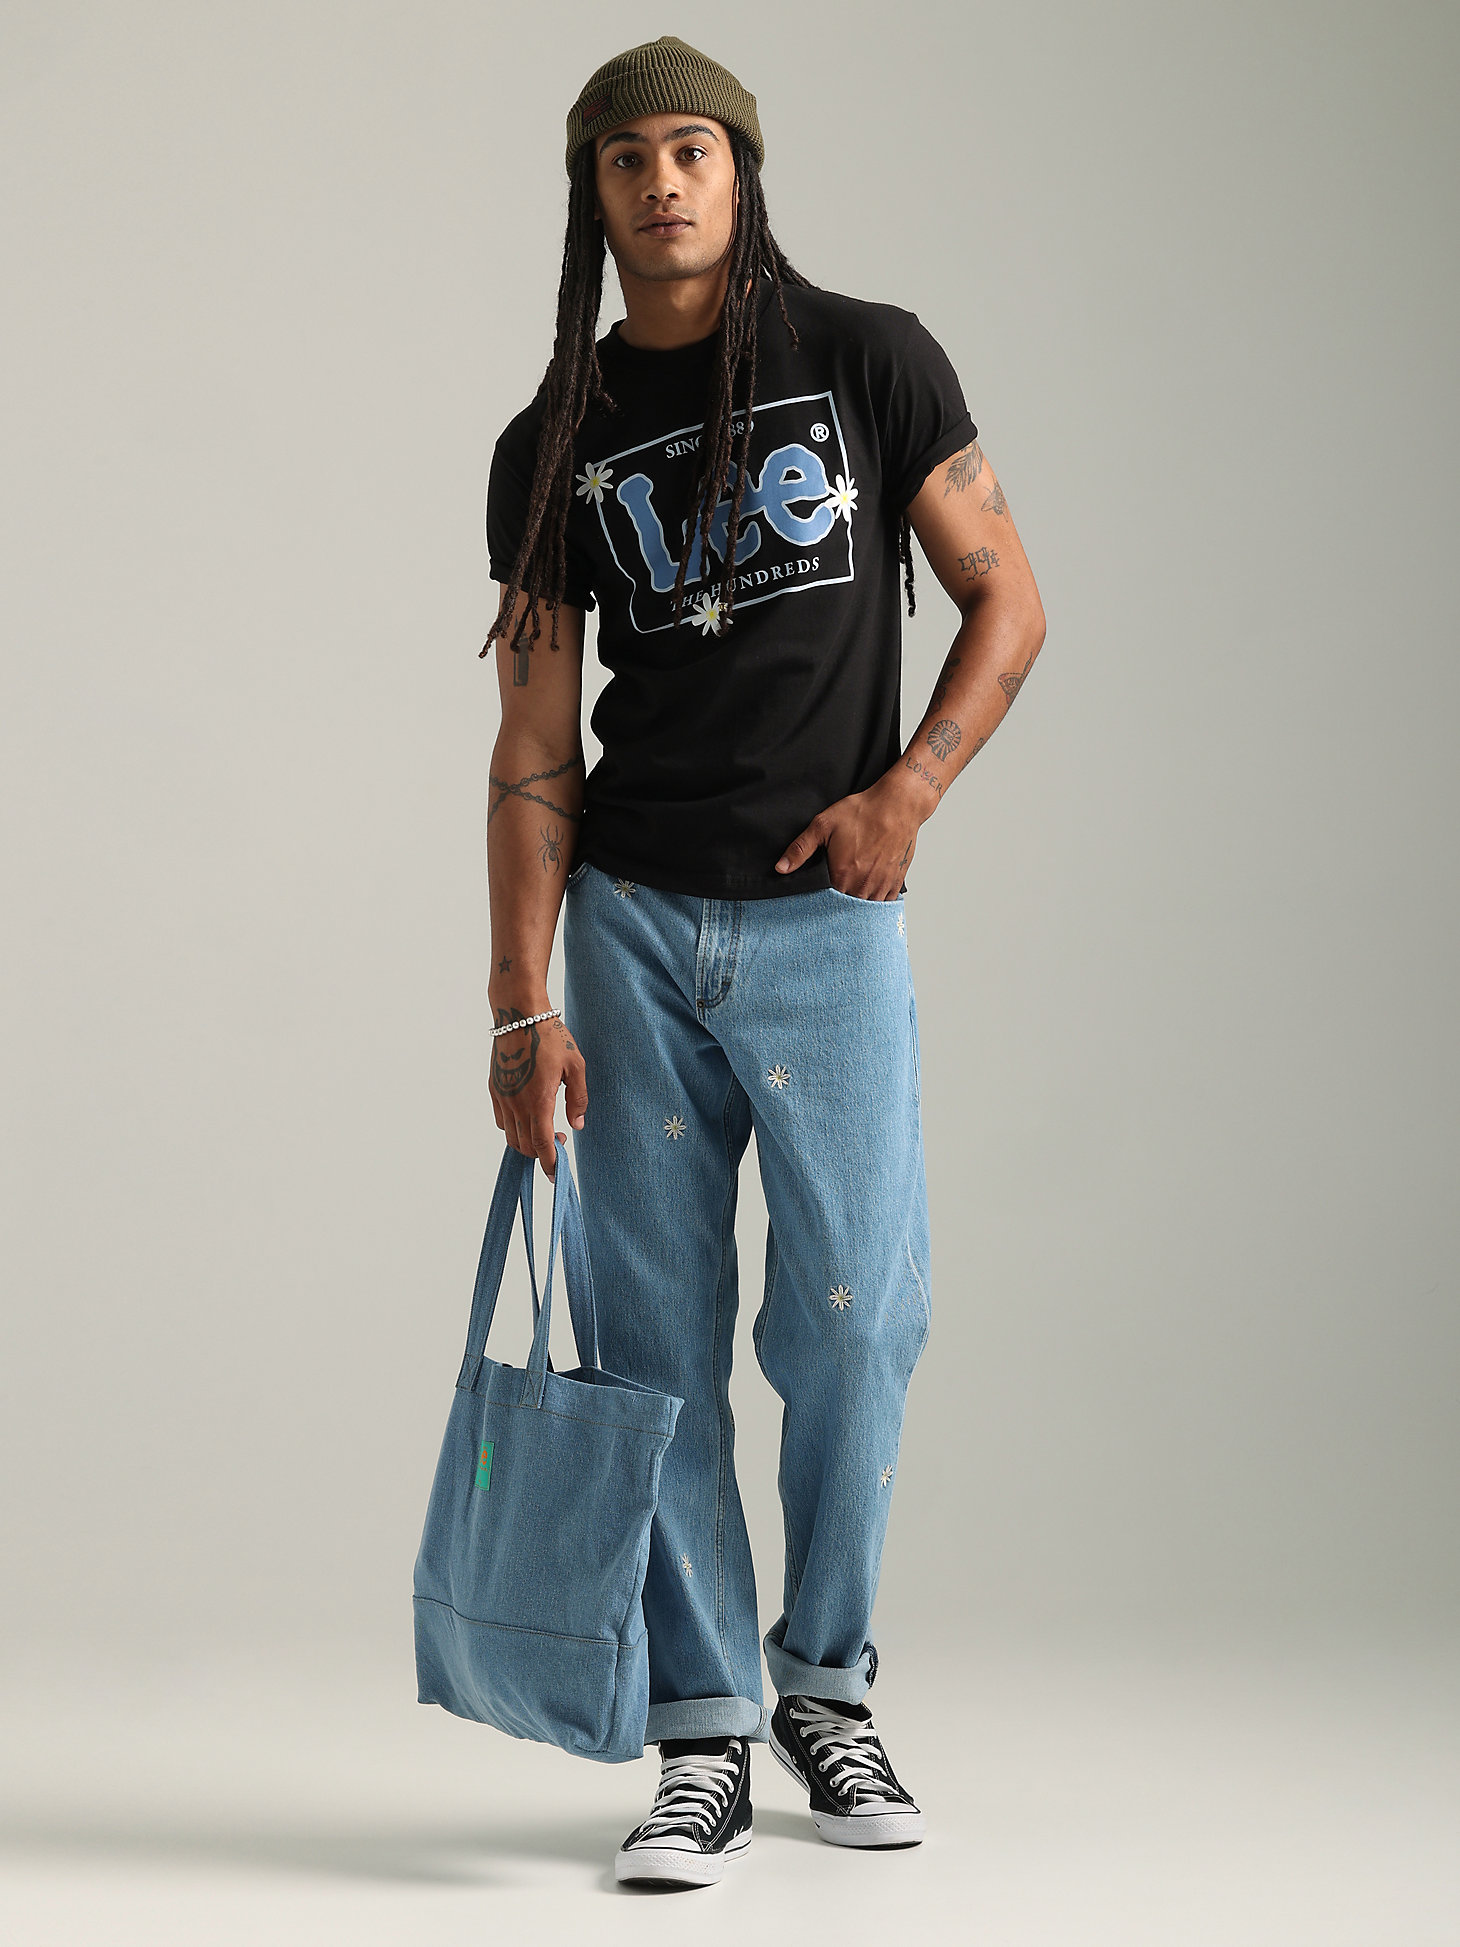 Men's Lee® x The Hundreds® Tote Bag in Stone Wash alternative view 1